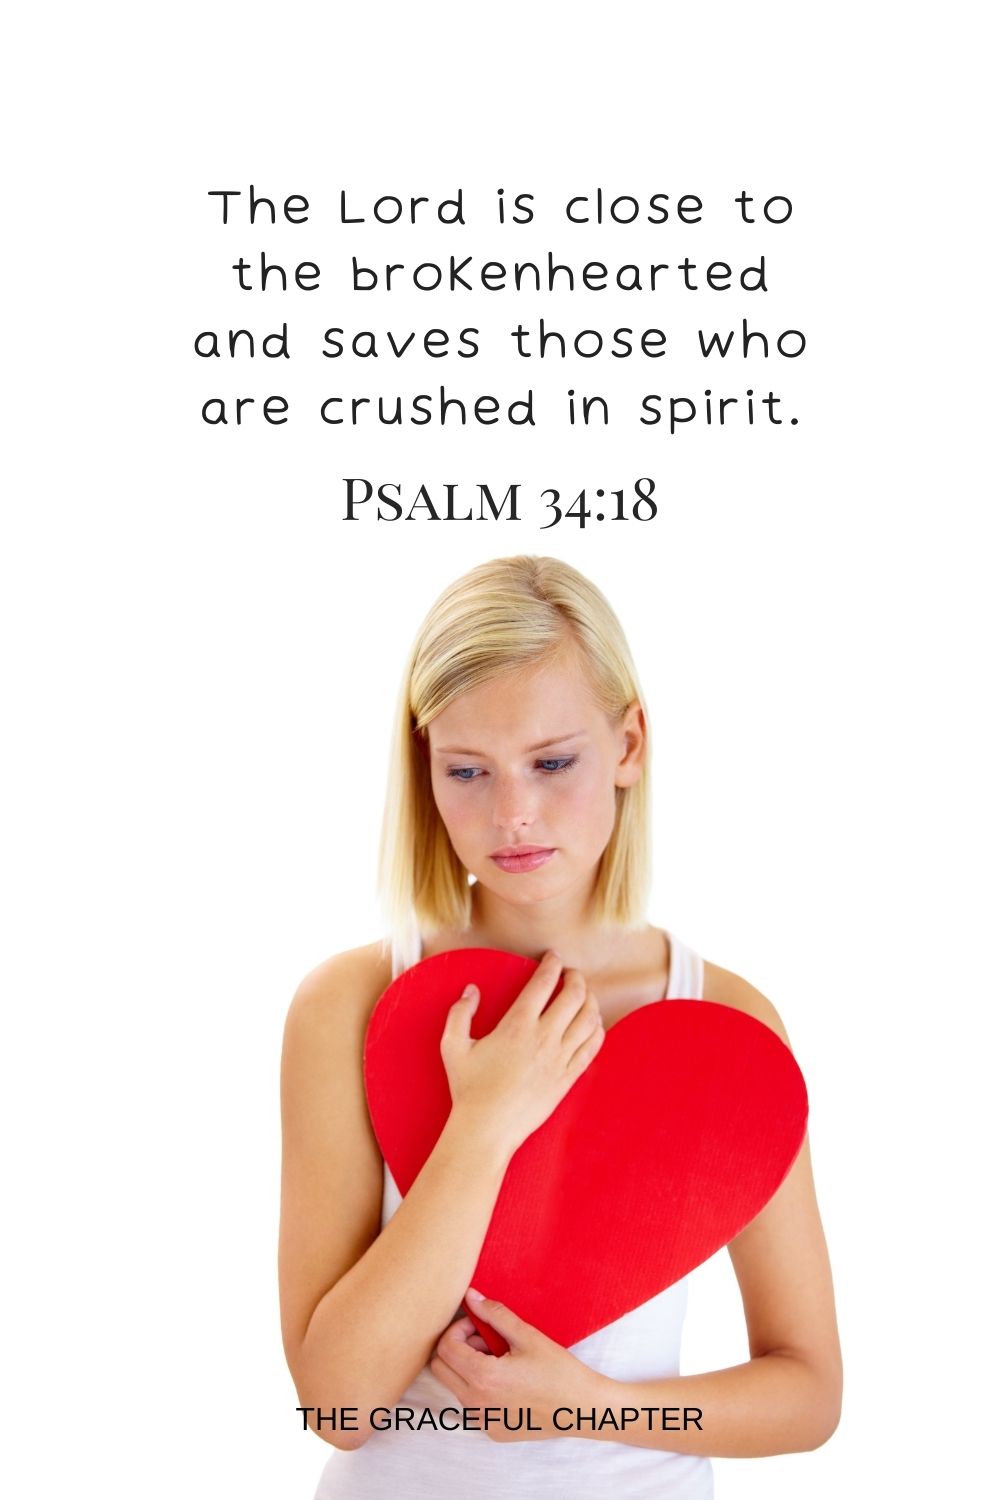 The Lord is close to the brokenhearted and saves those who are crushed in spirit. Psalm 34:18